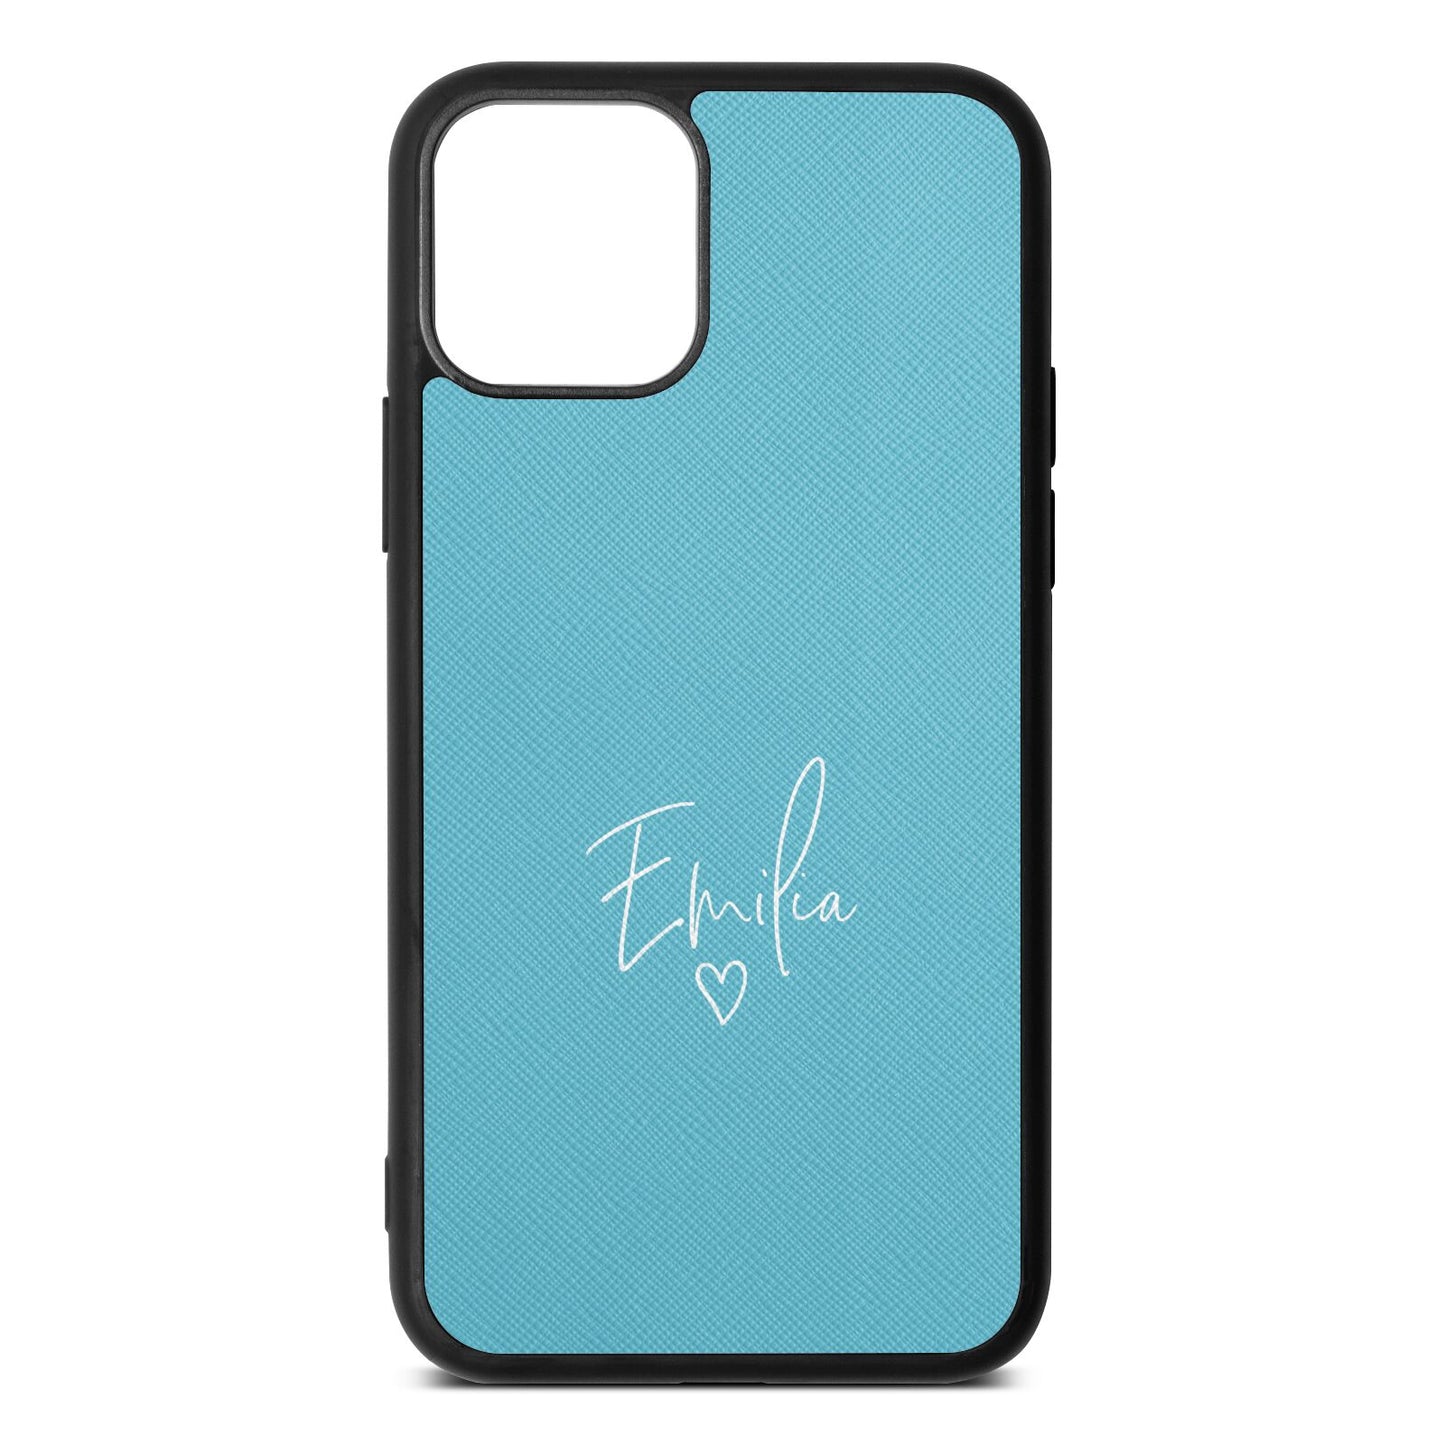 White Handwritten Name Transparent Sky Saffiano Leather iPhone 11 Case